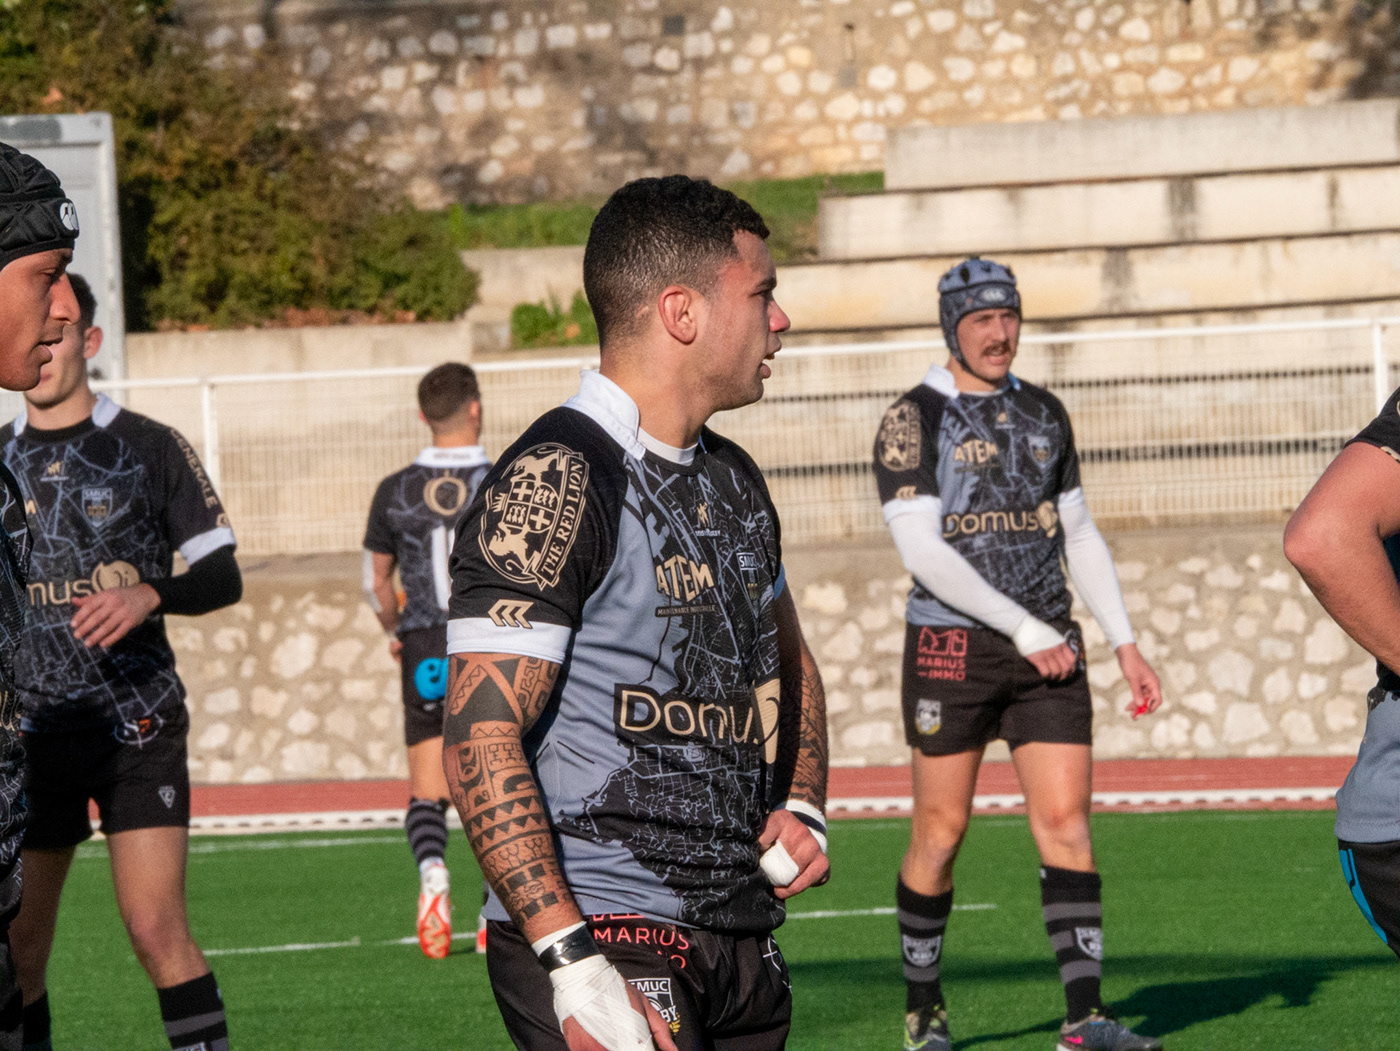 Rugby marseille sports Photography 